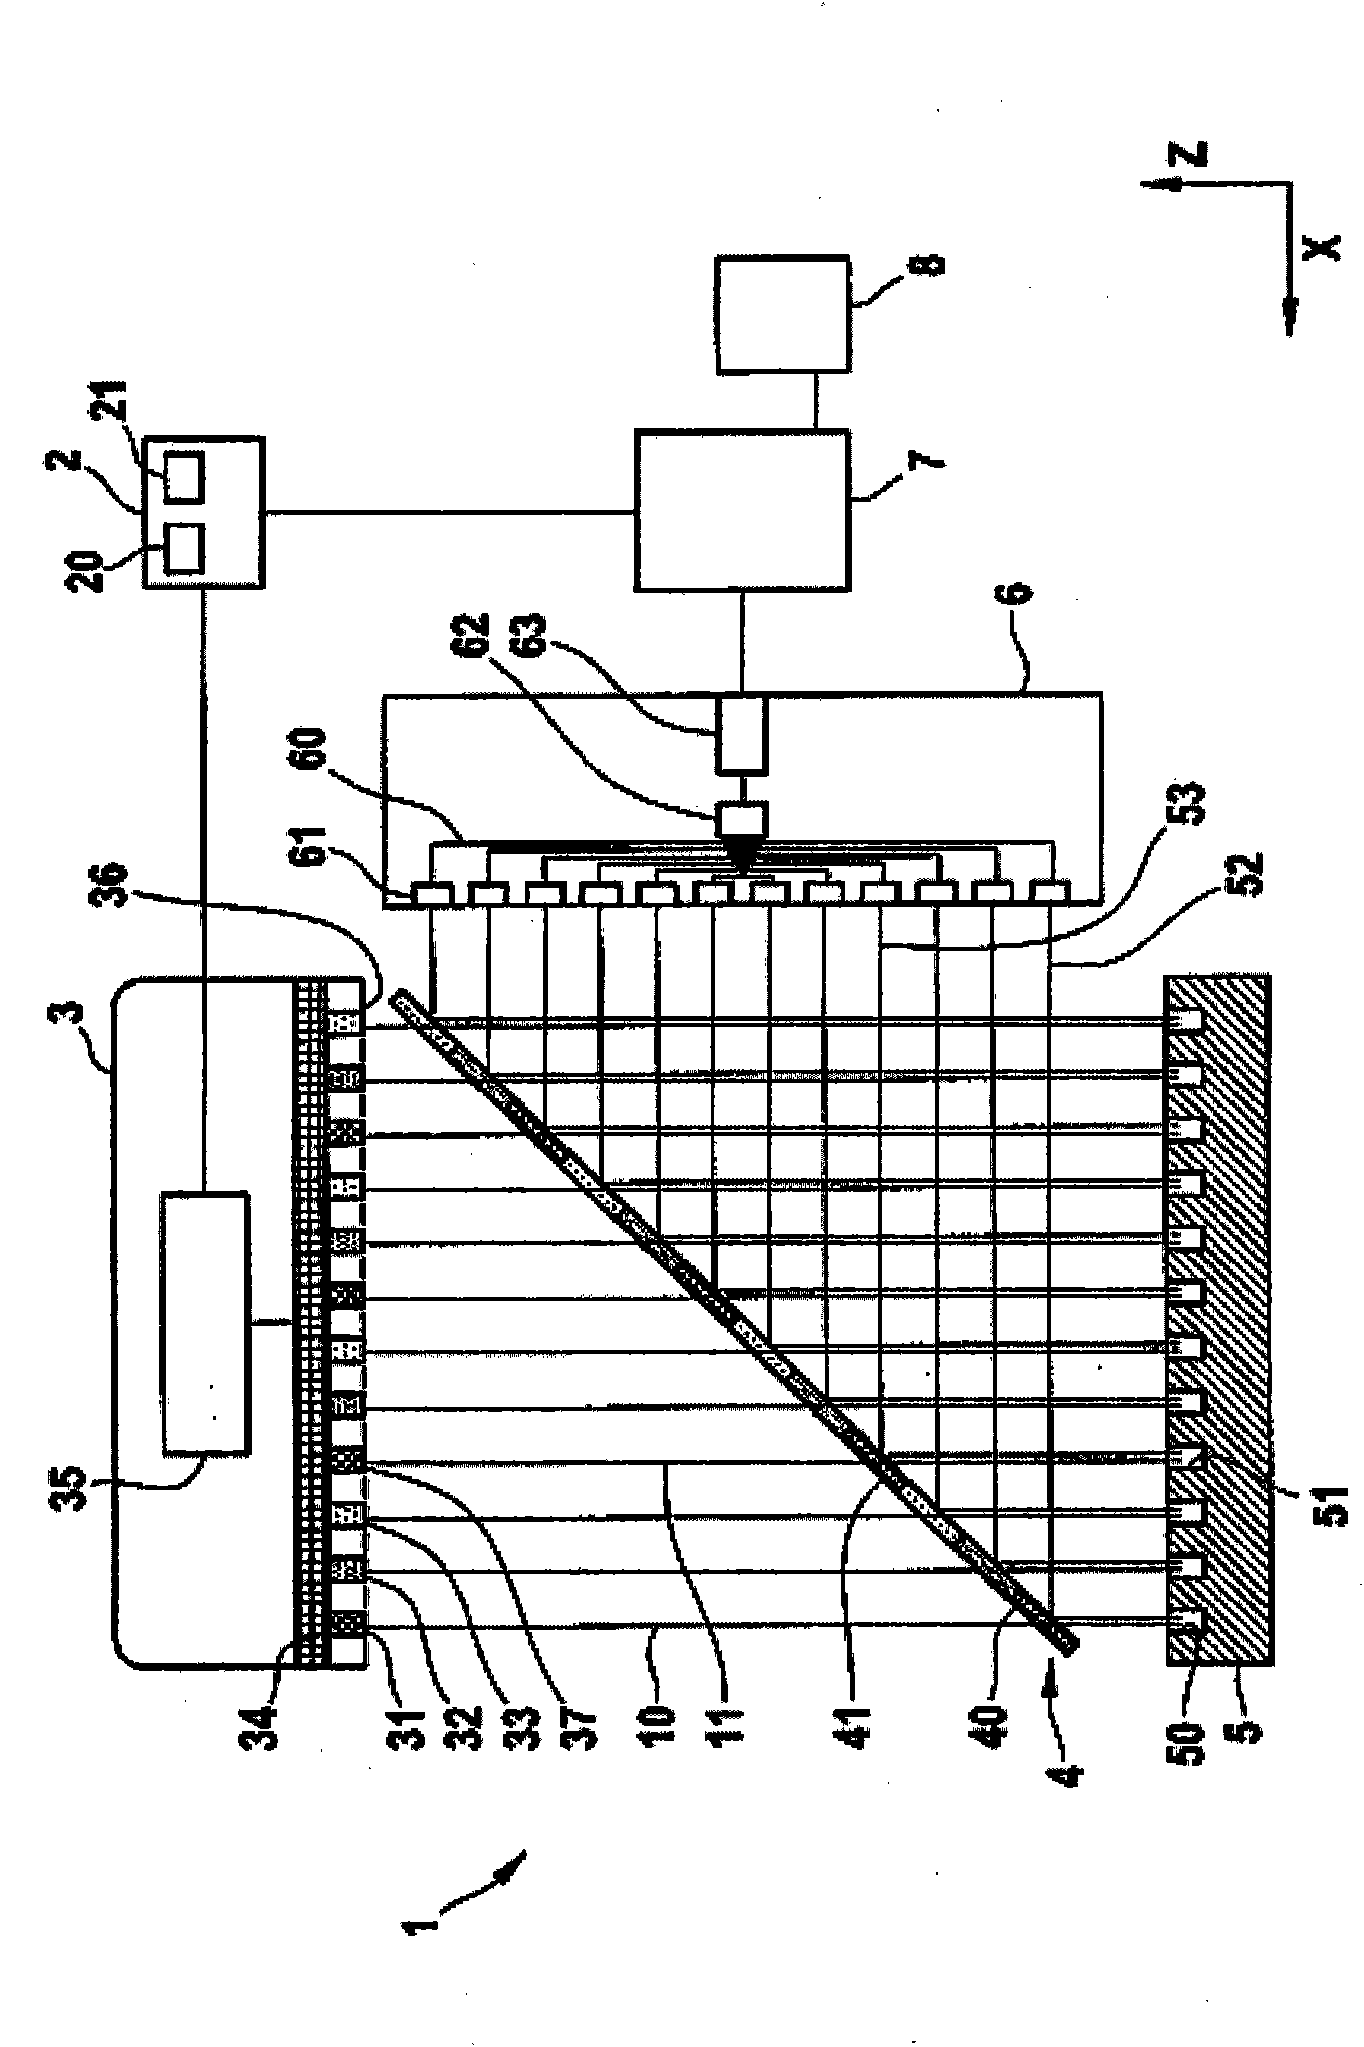 Device and method for radiometric measurement of plurality of samples